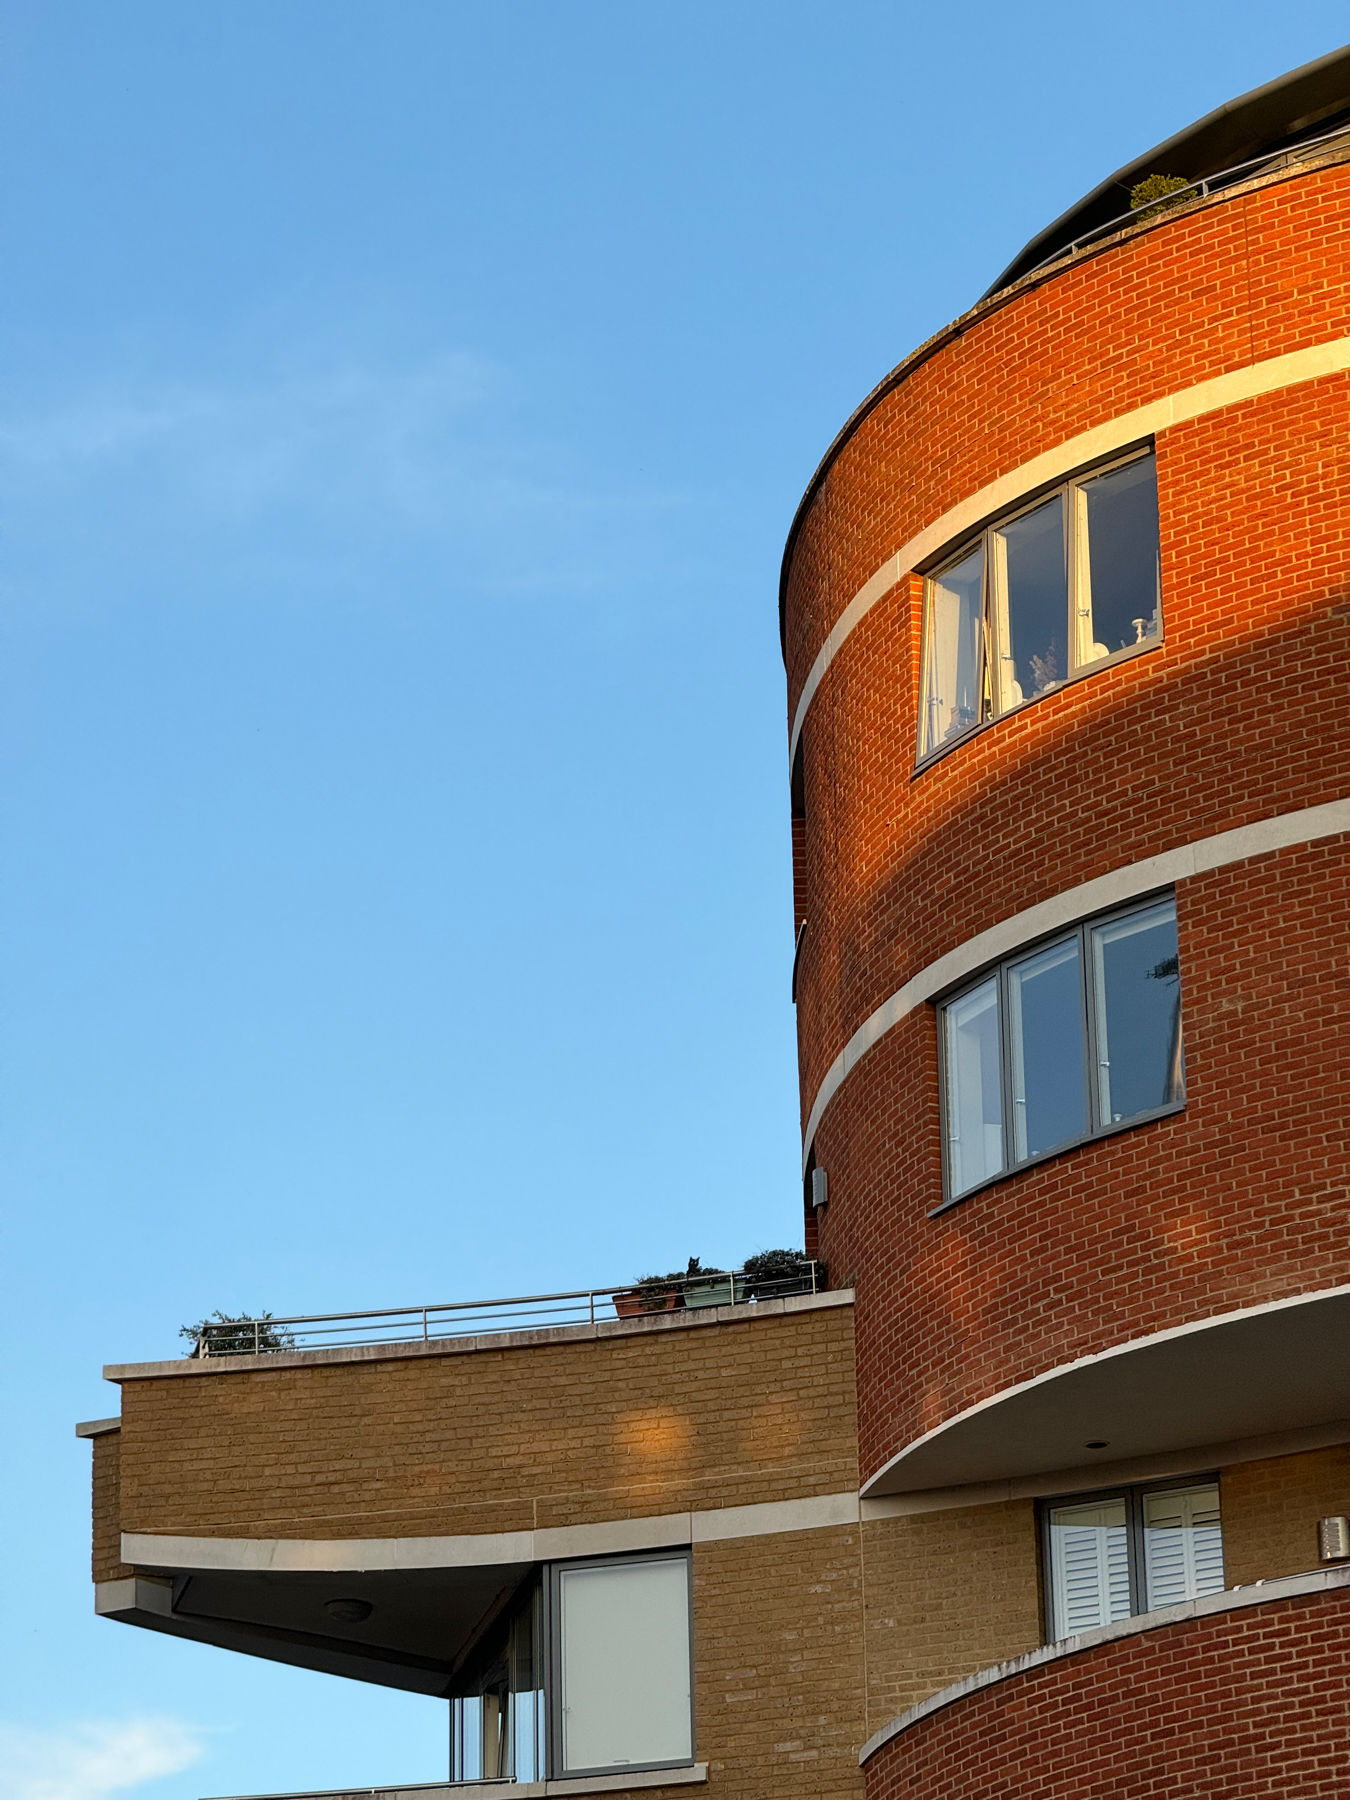 Golden hour light on the curved brick of a modern apartment